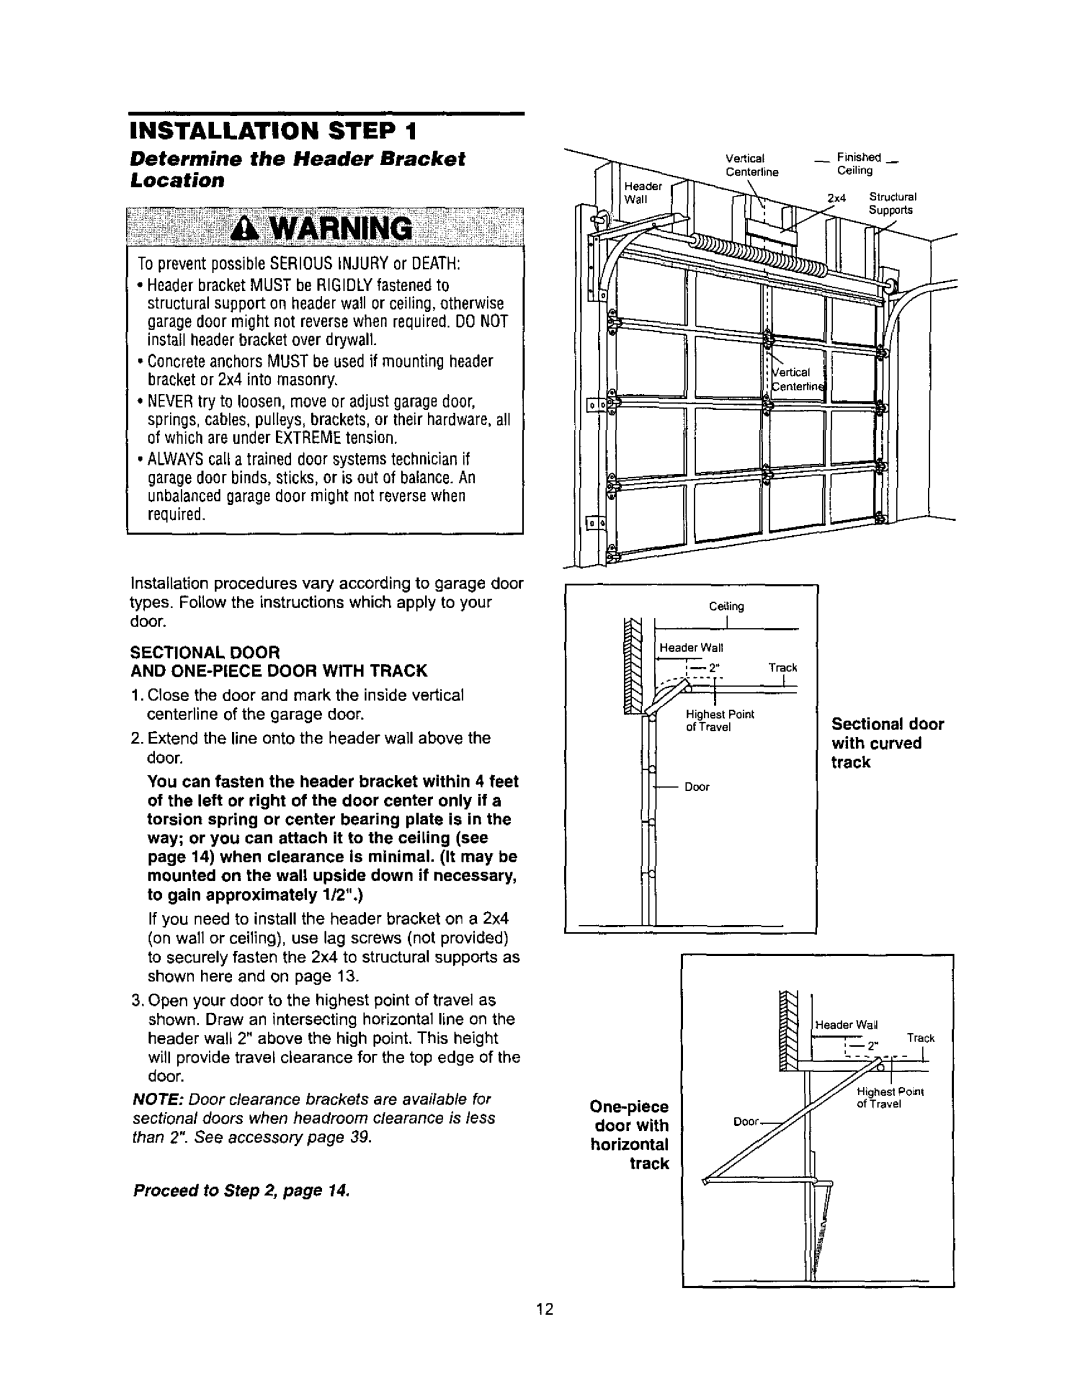 Sears 139.53960SRT owner manual Determine the Header Bracket Location, Sectional Door ONE-PIECEDOOR with Track, Proceed to 